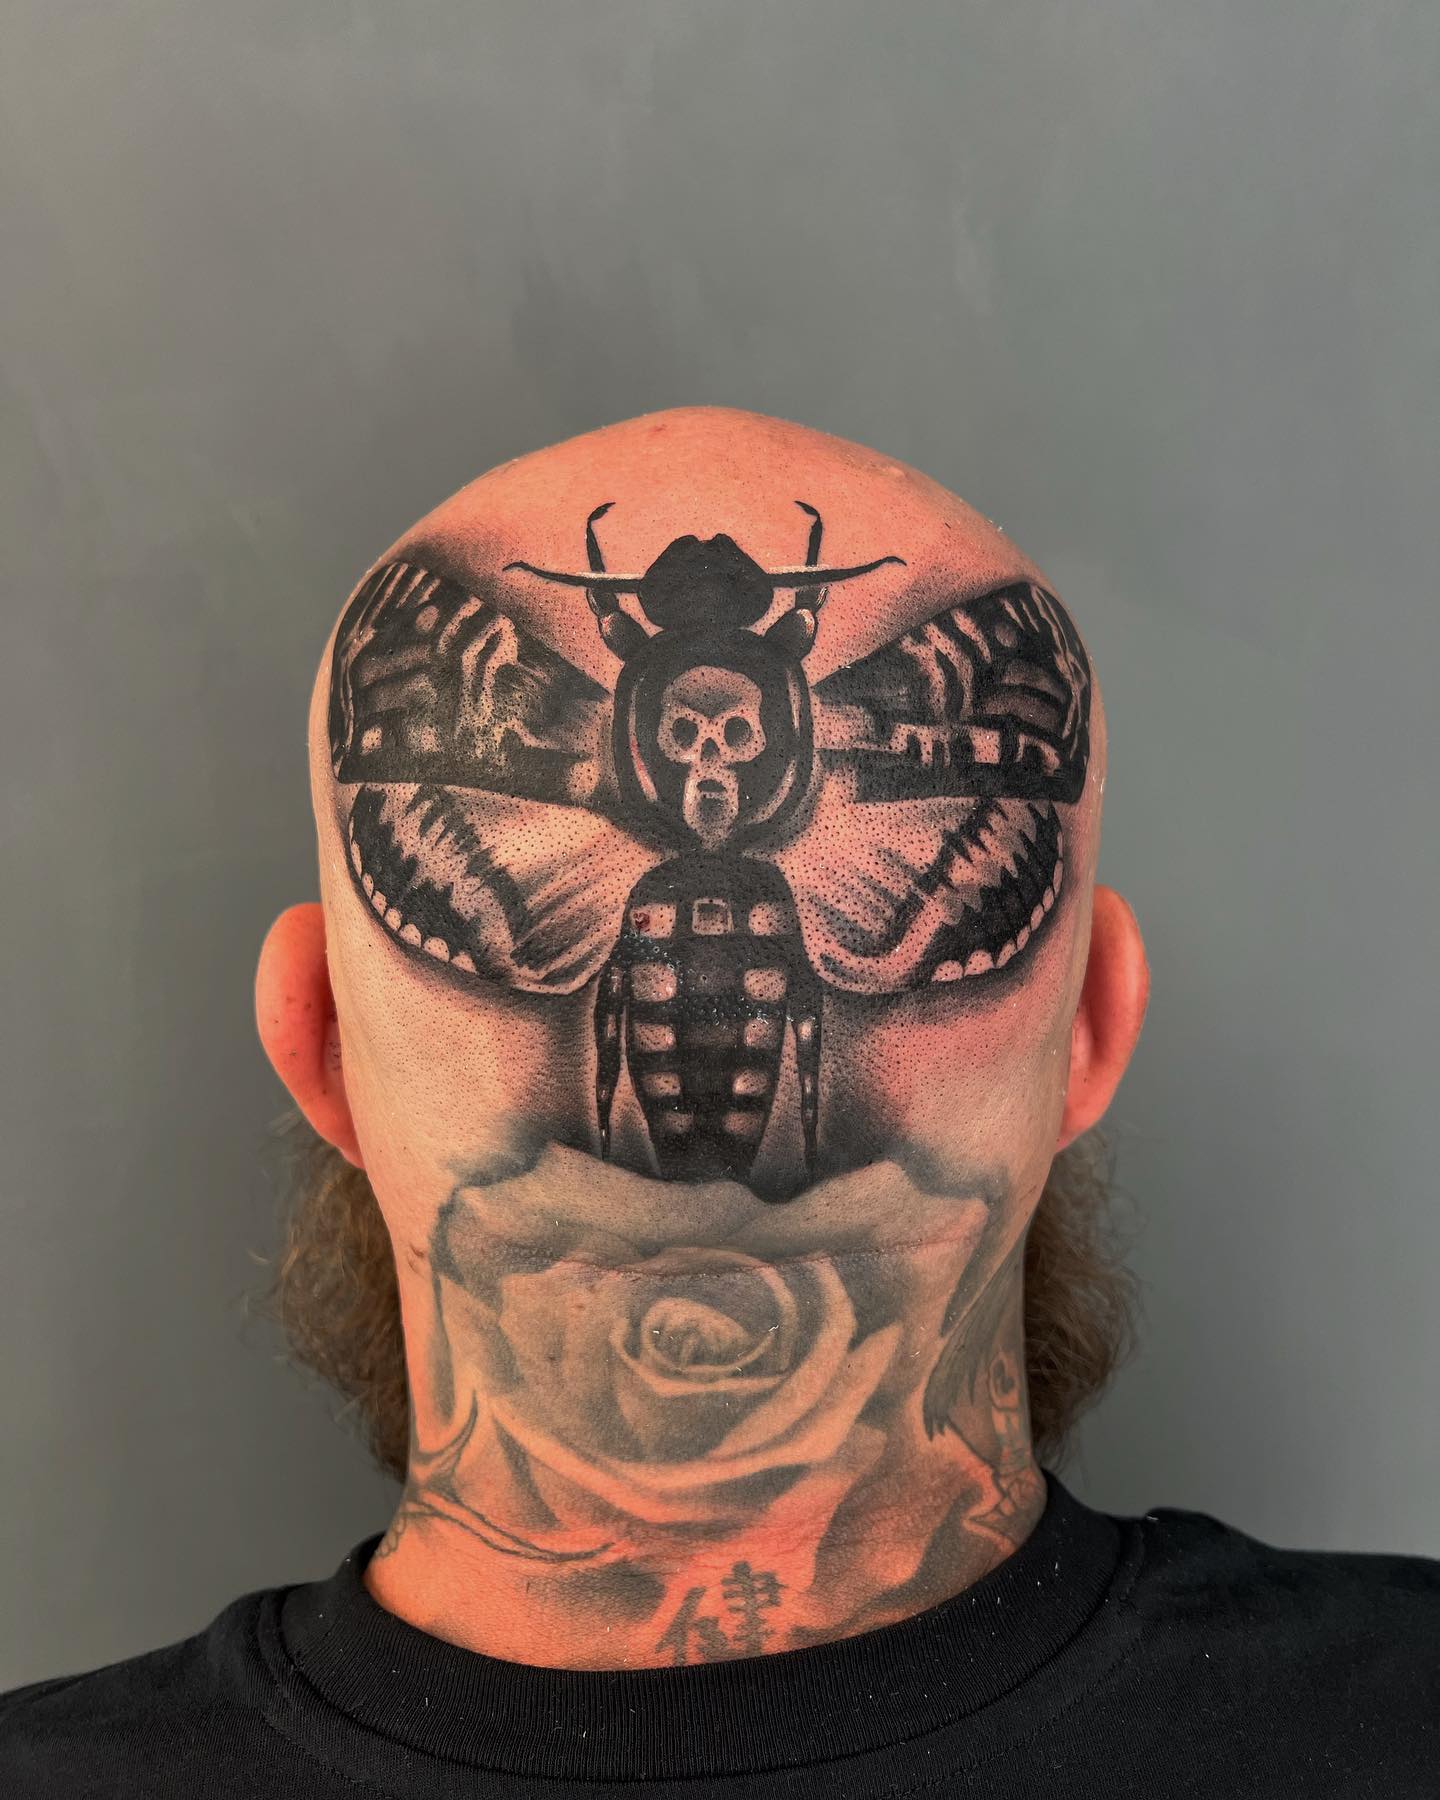 Almost no one would dare to go with this tattoo design. Do you dare to be as bold? This tattoo is for those who want to make a loud statement. Heads up since a head tattoo is going to hurt and it may not be for everyone.